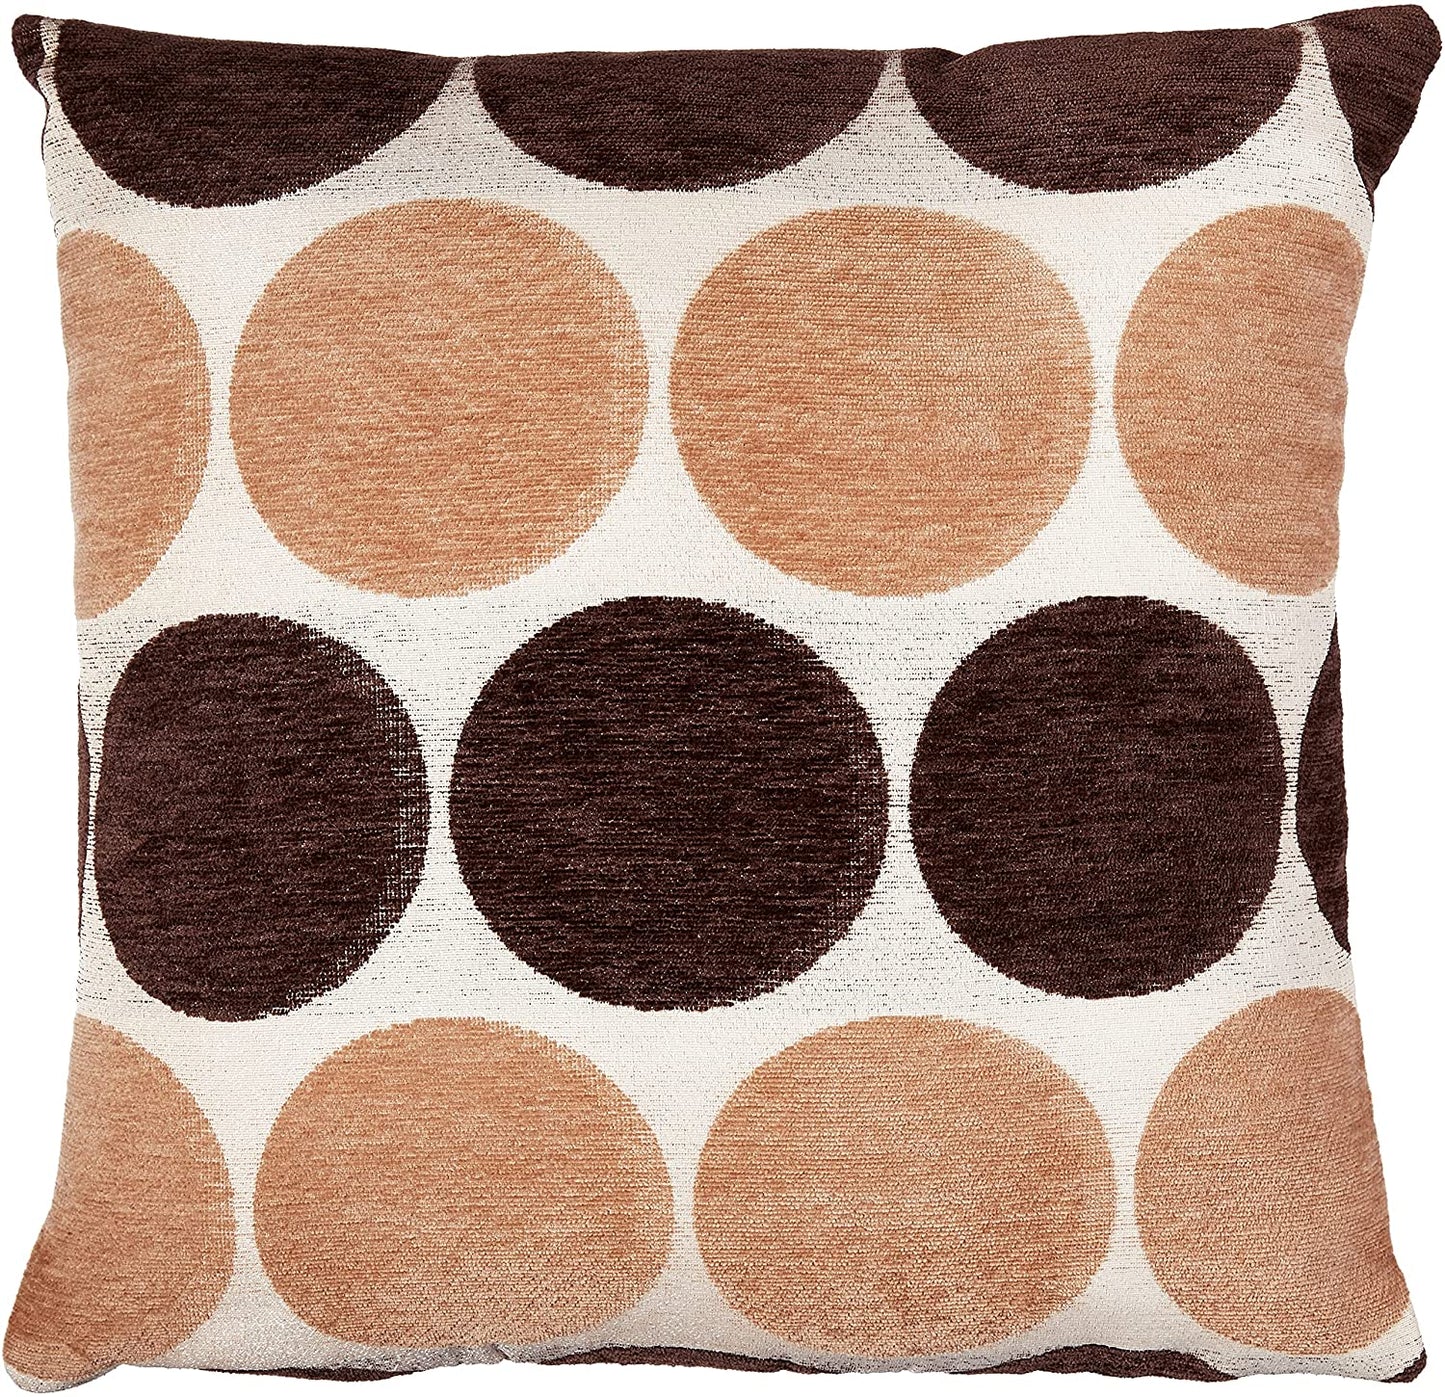 Chenille Circle Spots Pattern Decorative Throw Pillow Cover